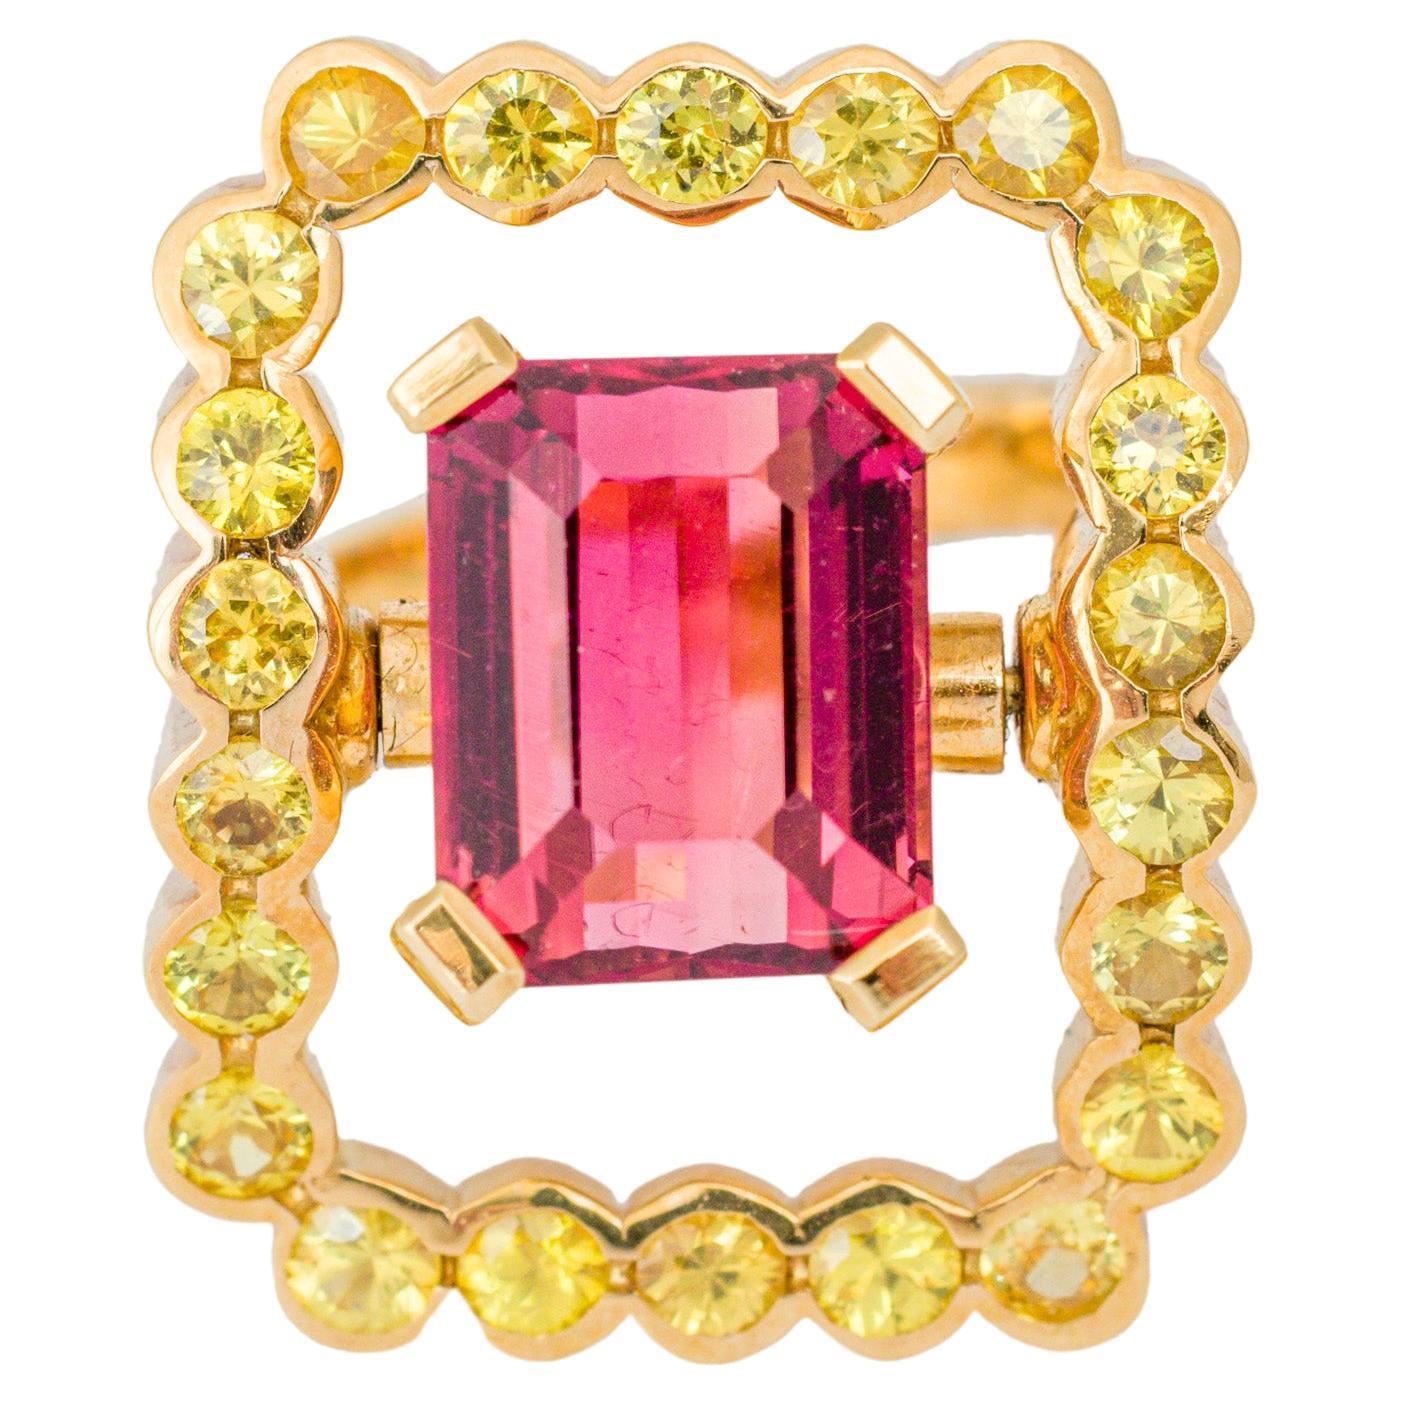 "Costis" Frame In Motion Ring with 8.22 carats Rubellite and Yellow Sapphires